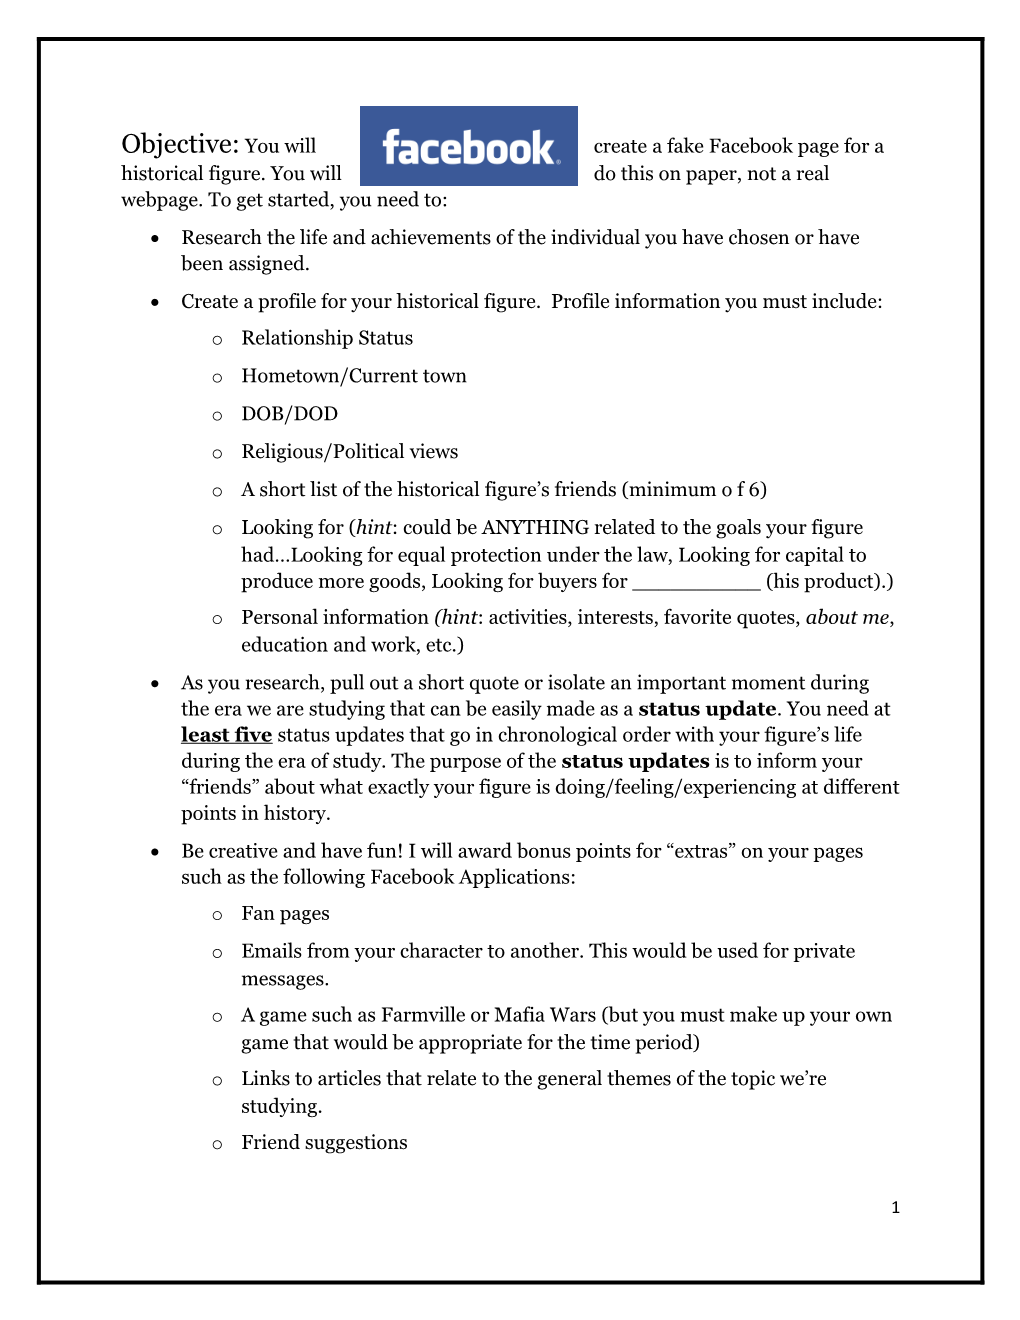 For This Assignment, You Will Be Creating a Fake Facebook Page for a Key Member During